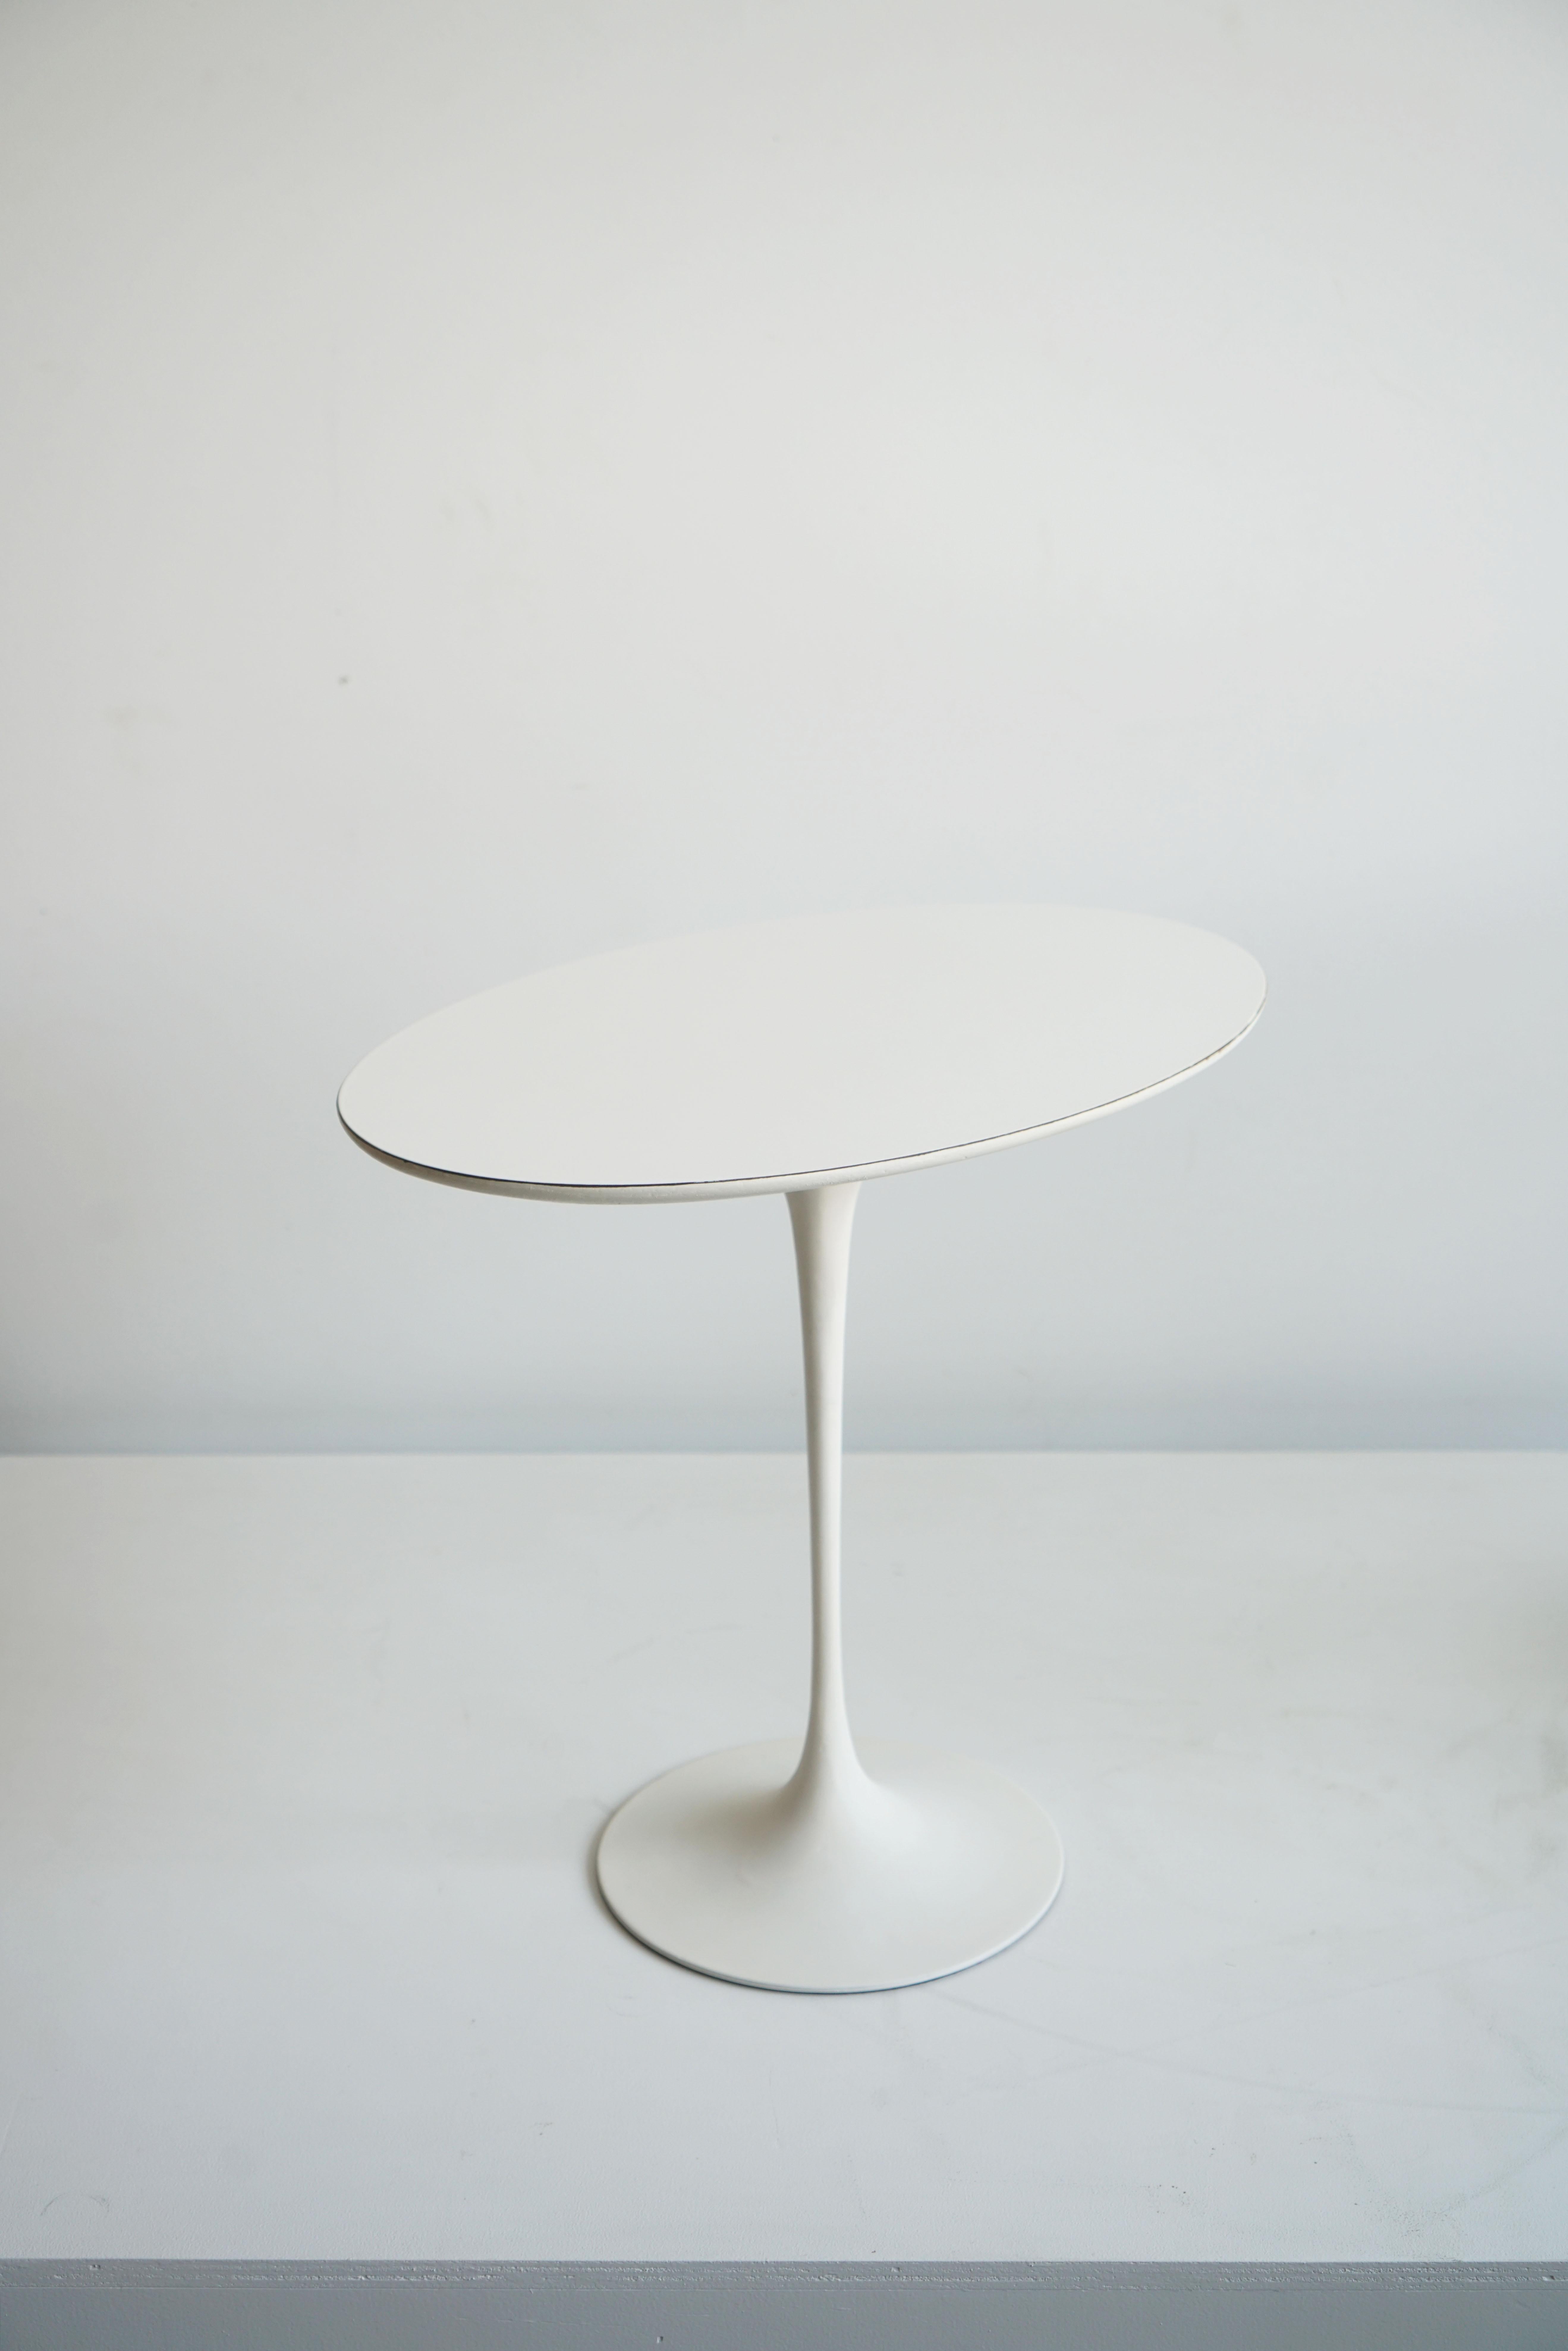 Very early Eero Saarinen for Knoll Tulip table, oval shaped top circa 1957 For Sale 1